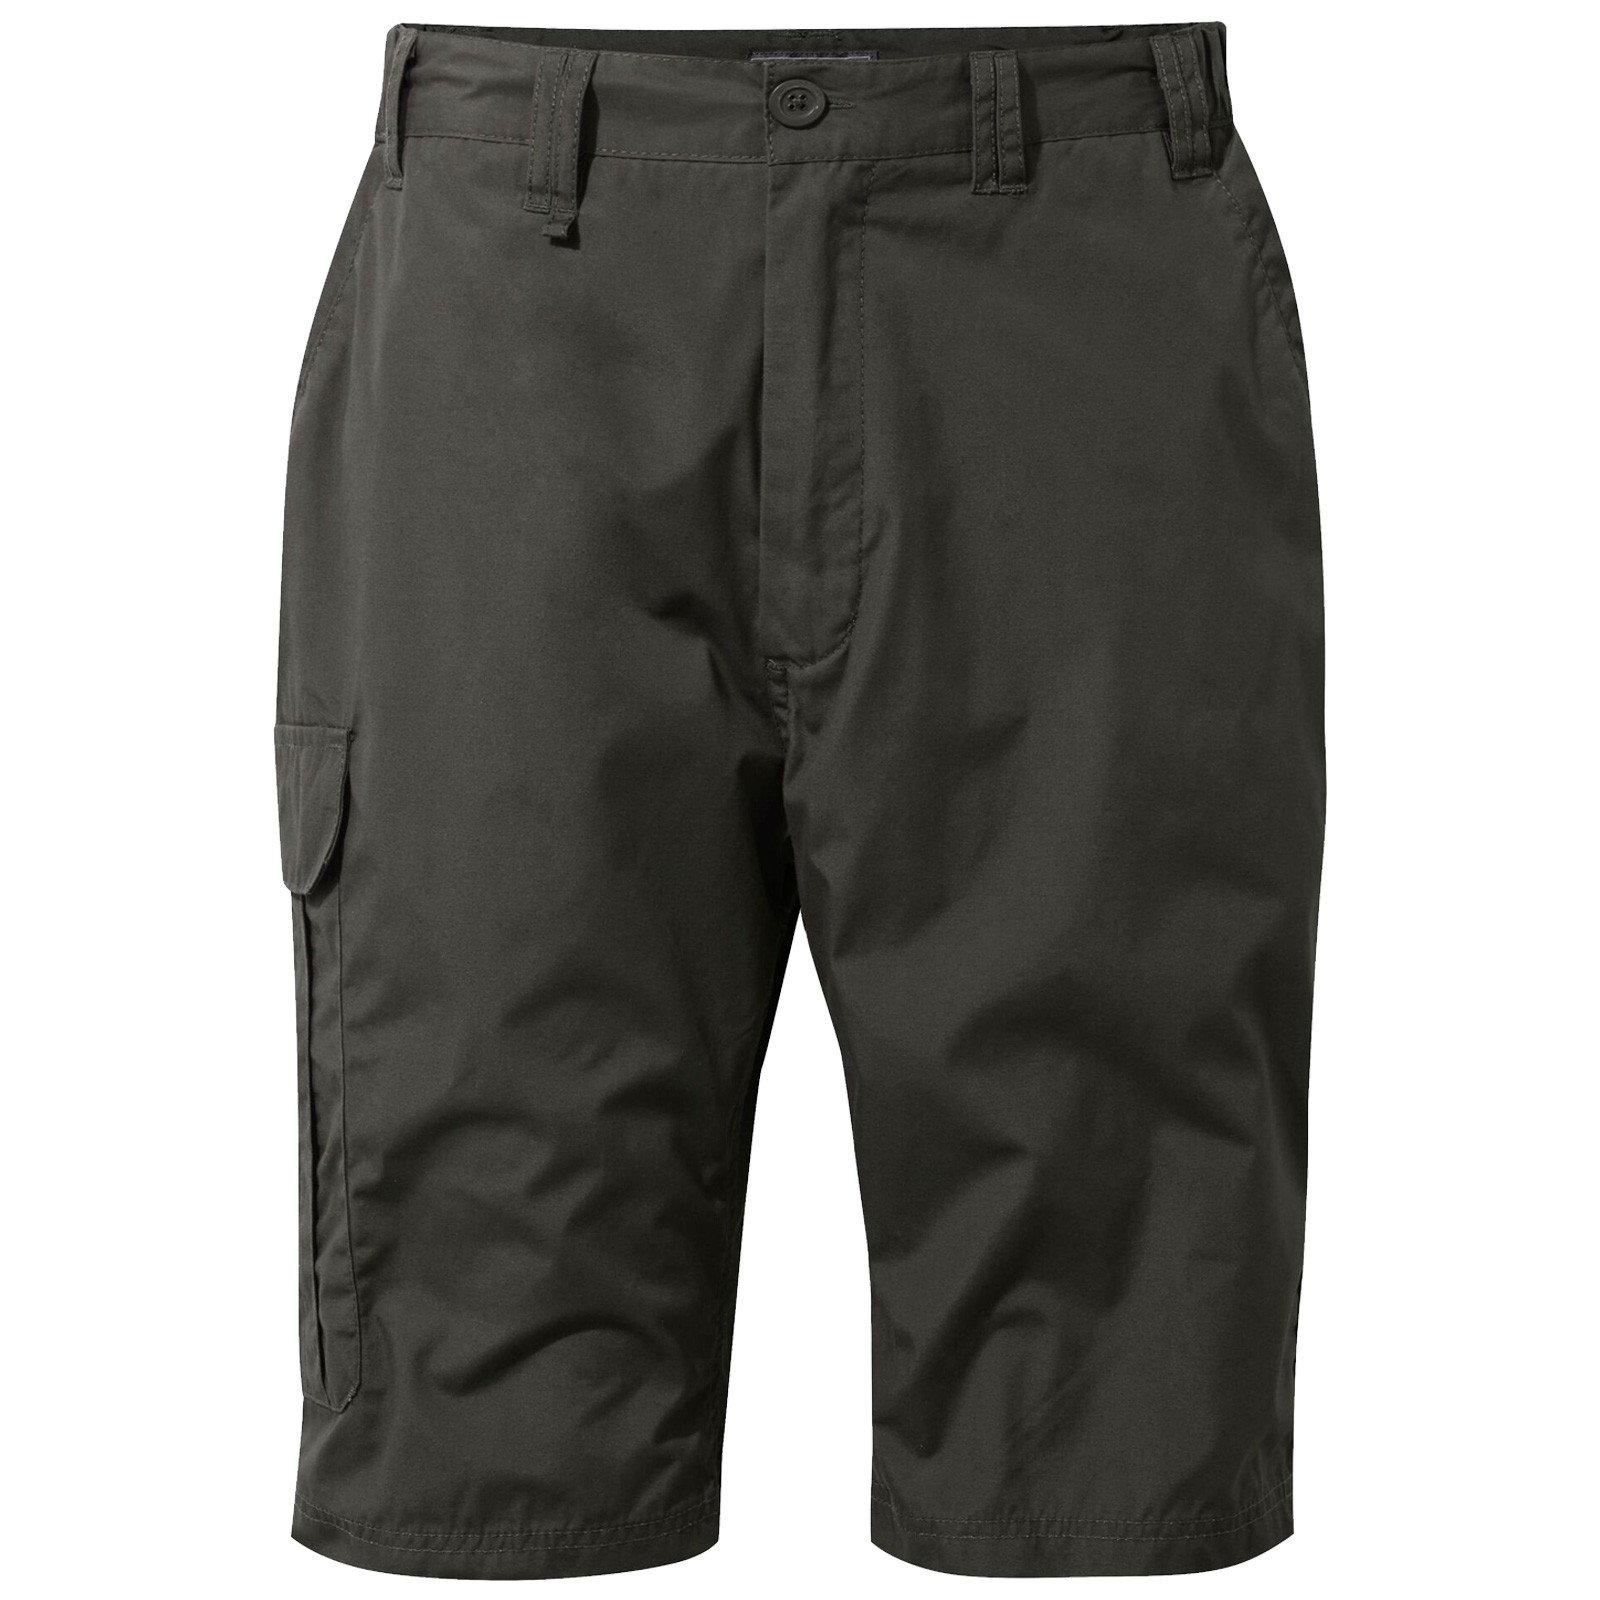 Craghoppers Mens Kiwi Pro Stretch Fit Shorts Lightweight Casual Outdoors Pant 